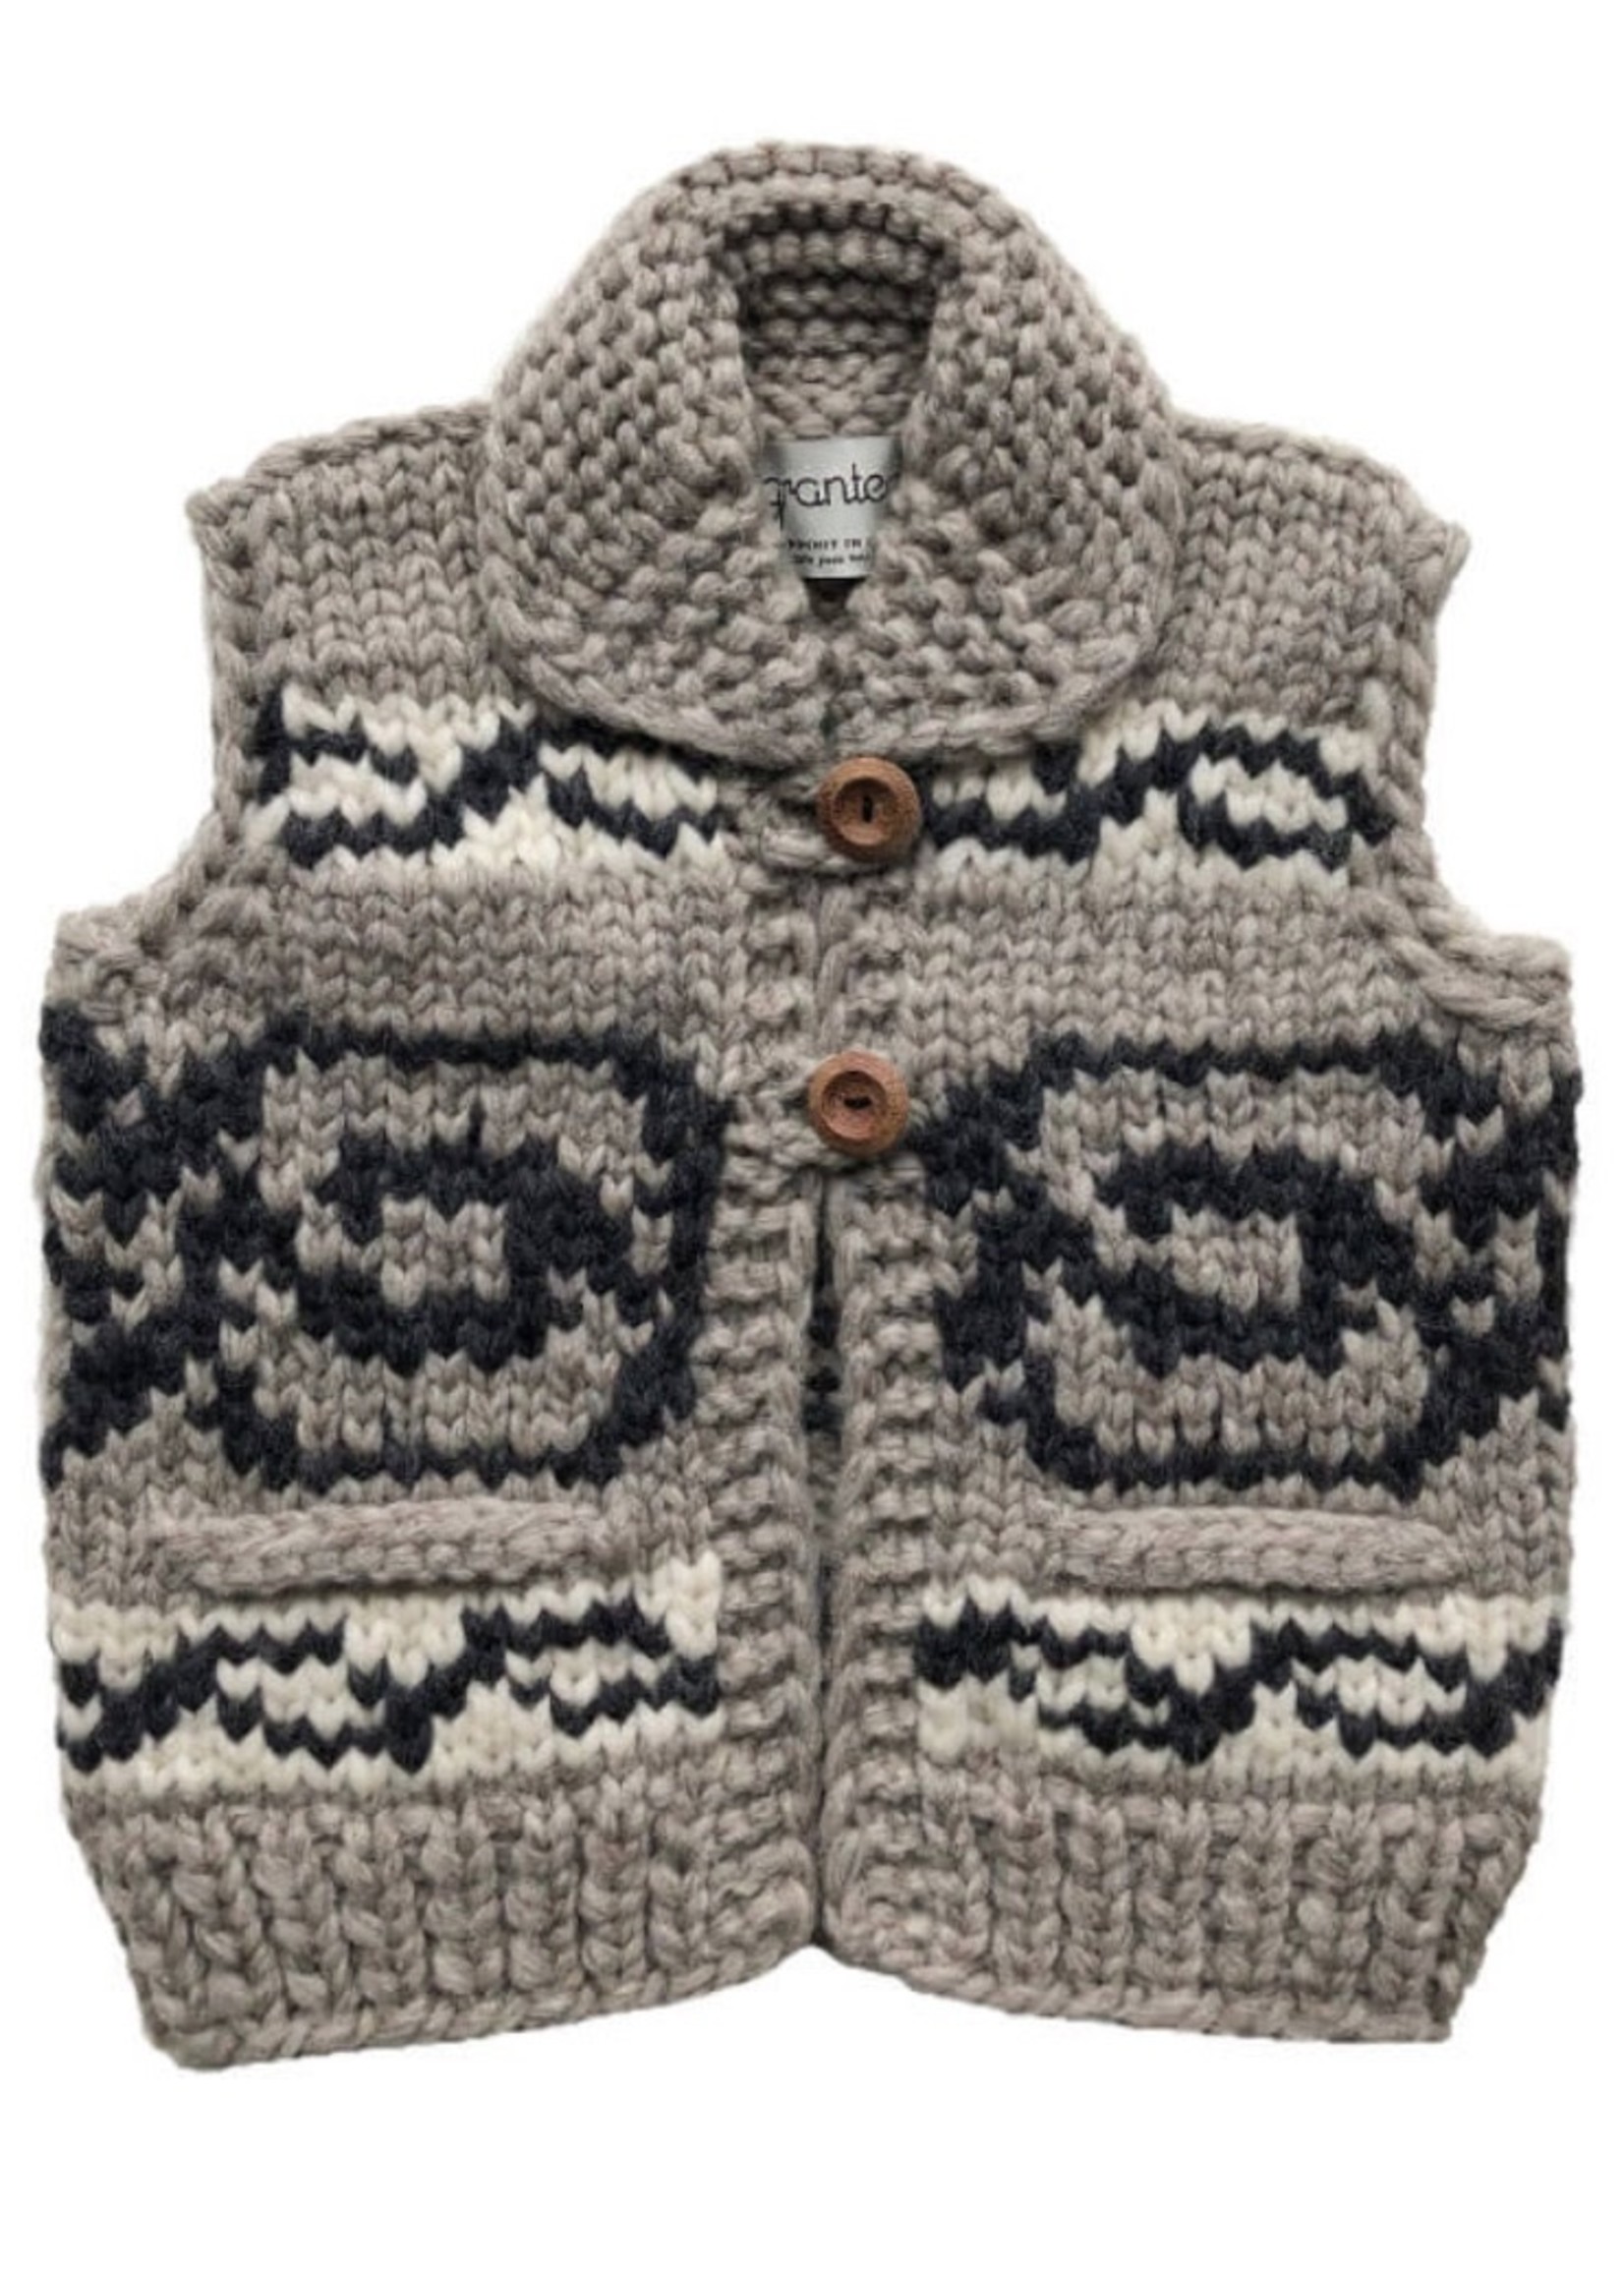 Granted Granted Clothing, Kids Sweater Vest